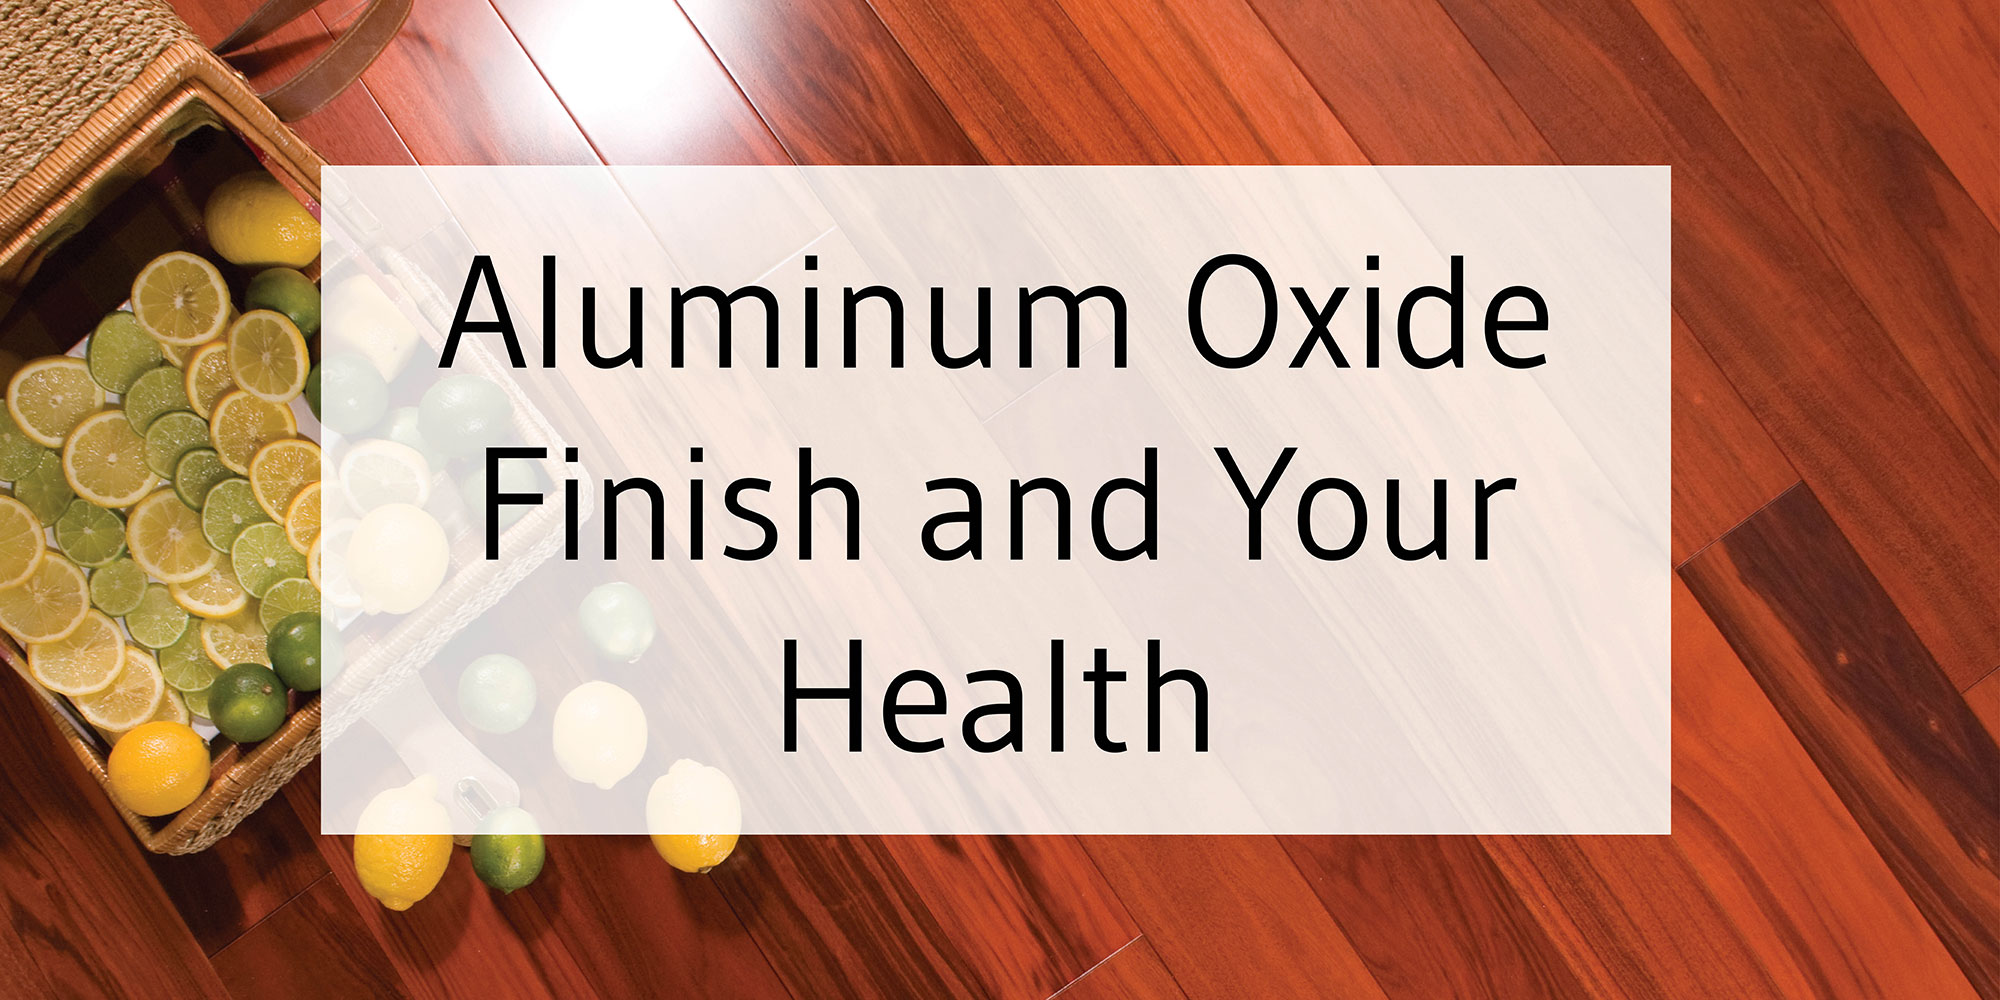 Aluminum Oxide Finish And Your Health, Which Hardwood Floor Is Most Scratch Resistant